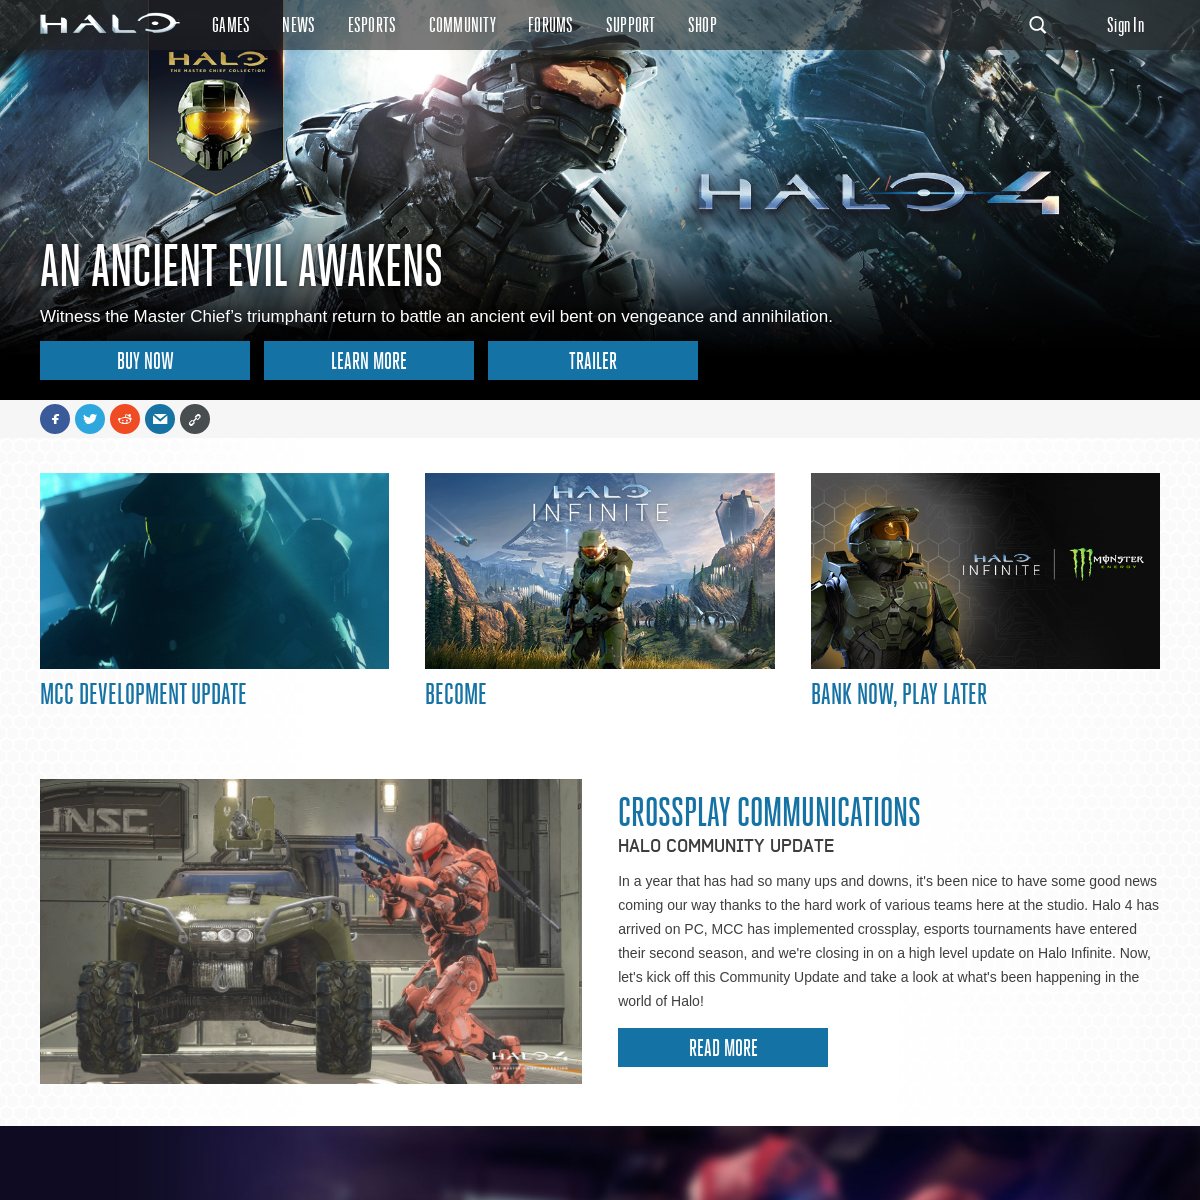 A complete backup of halowaypoint.com